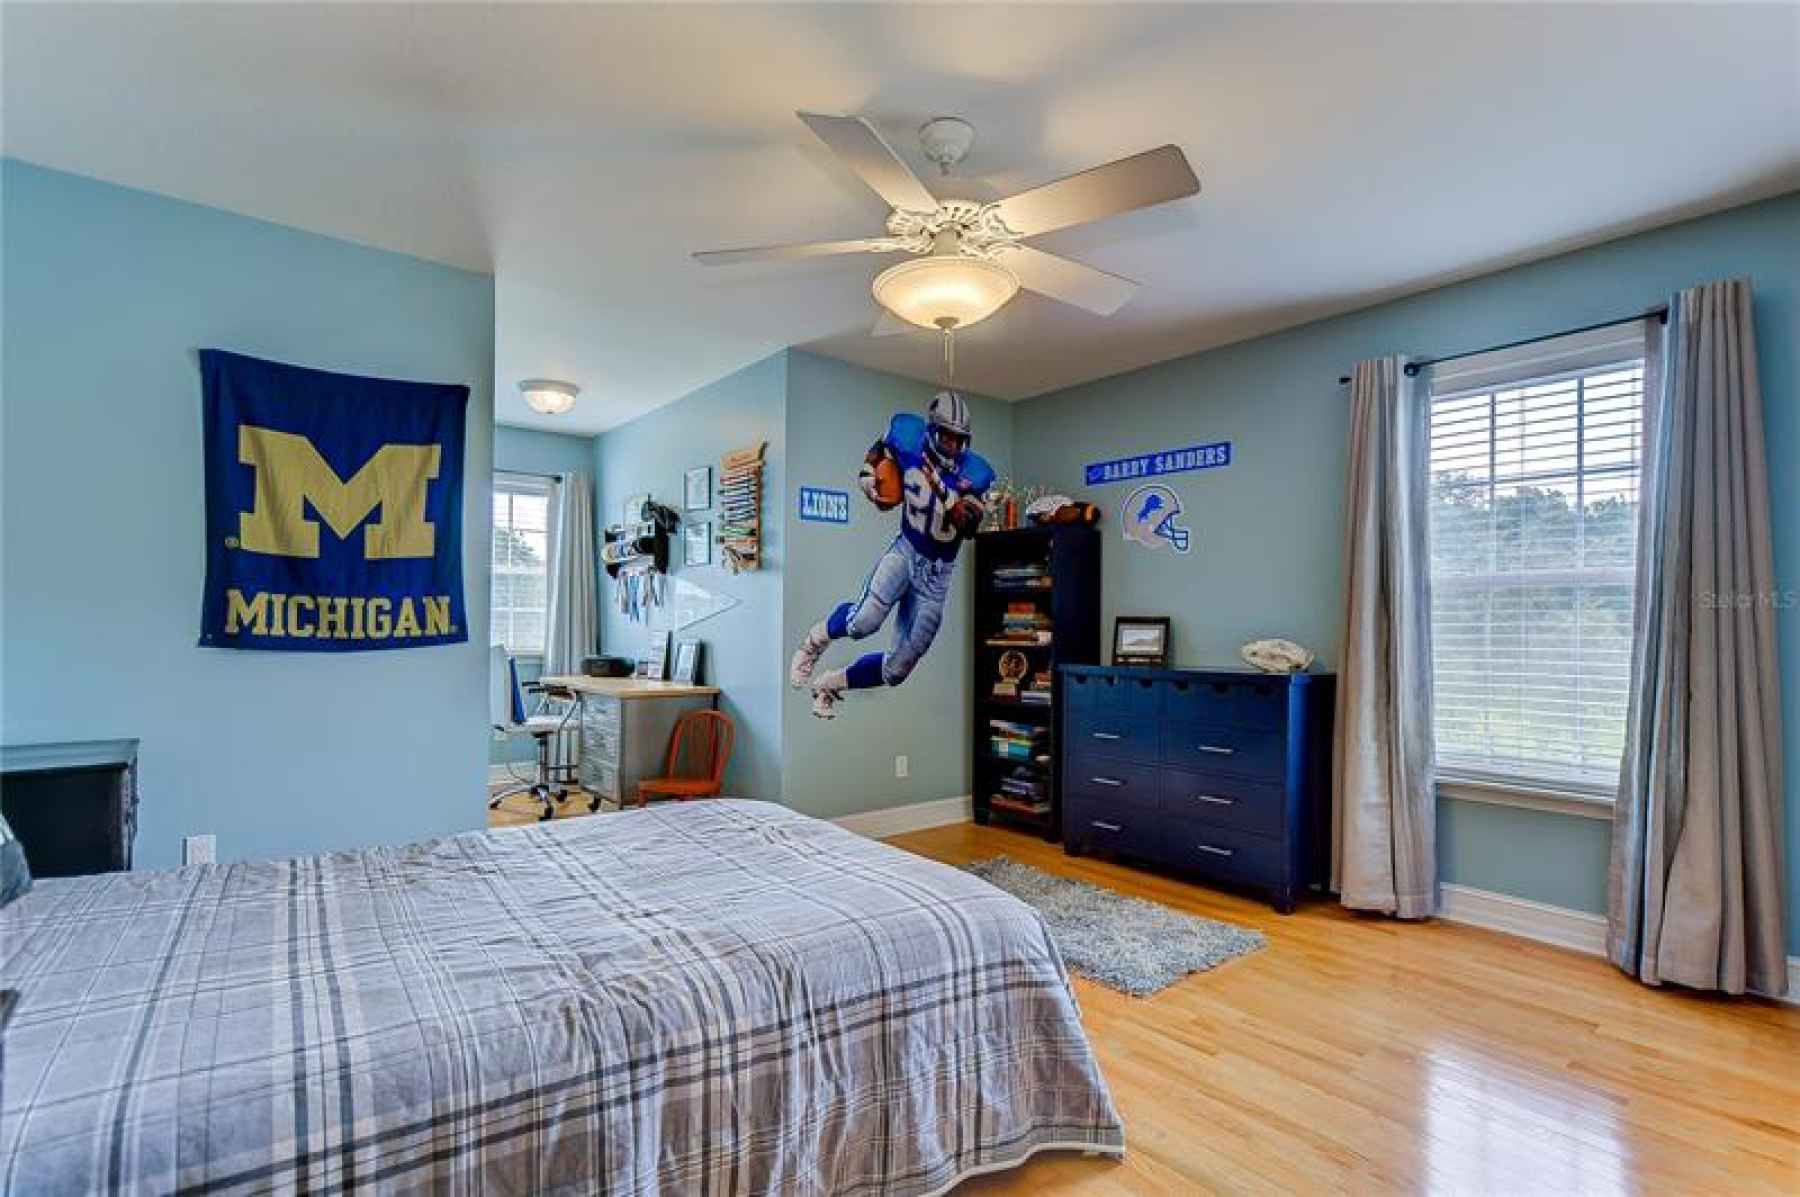 Fourth bedroom!